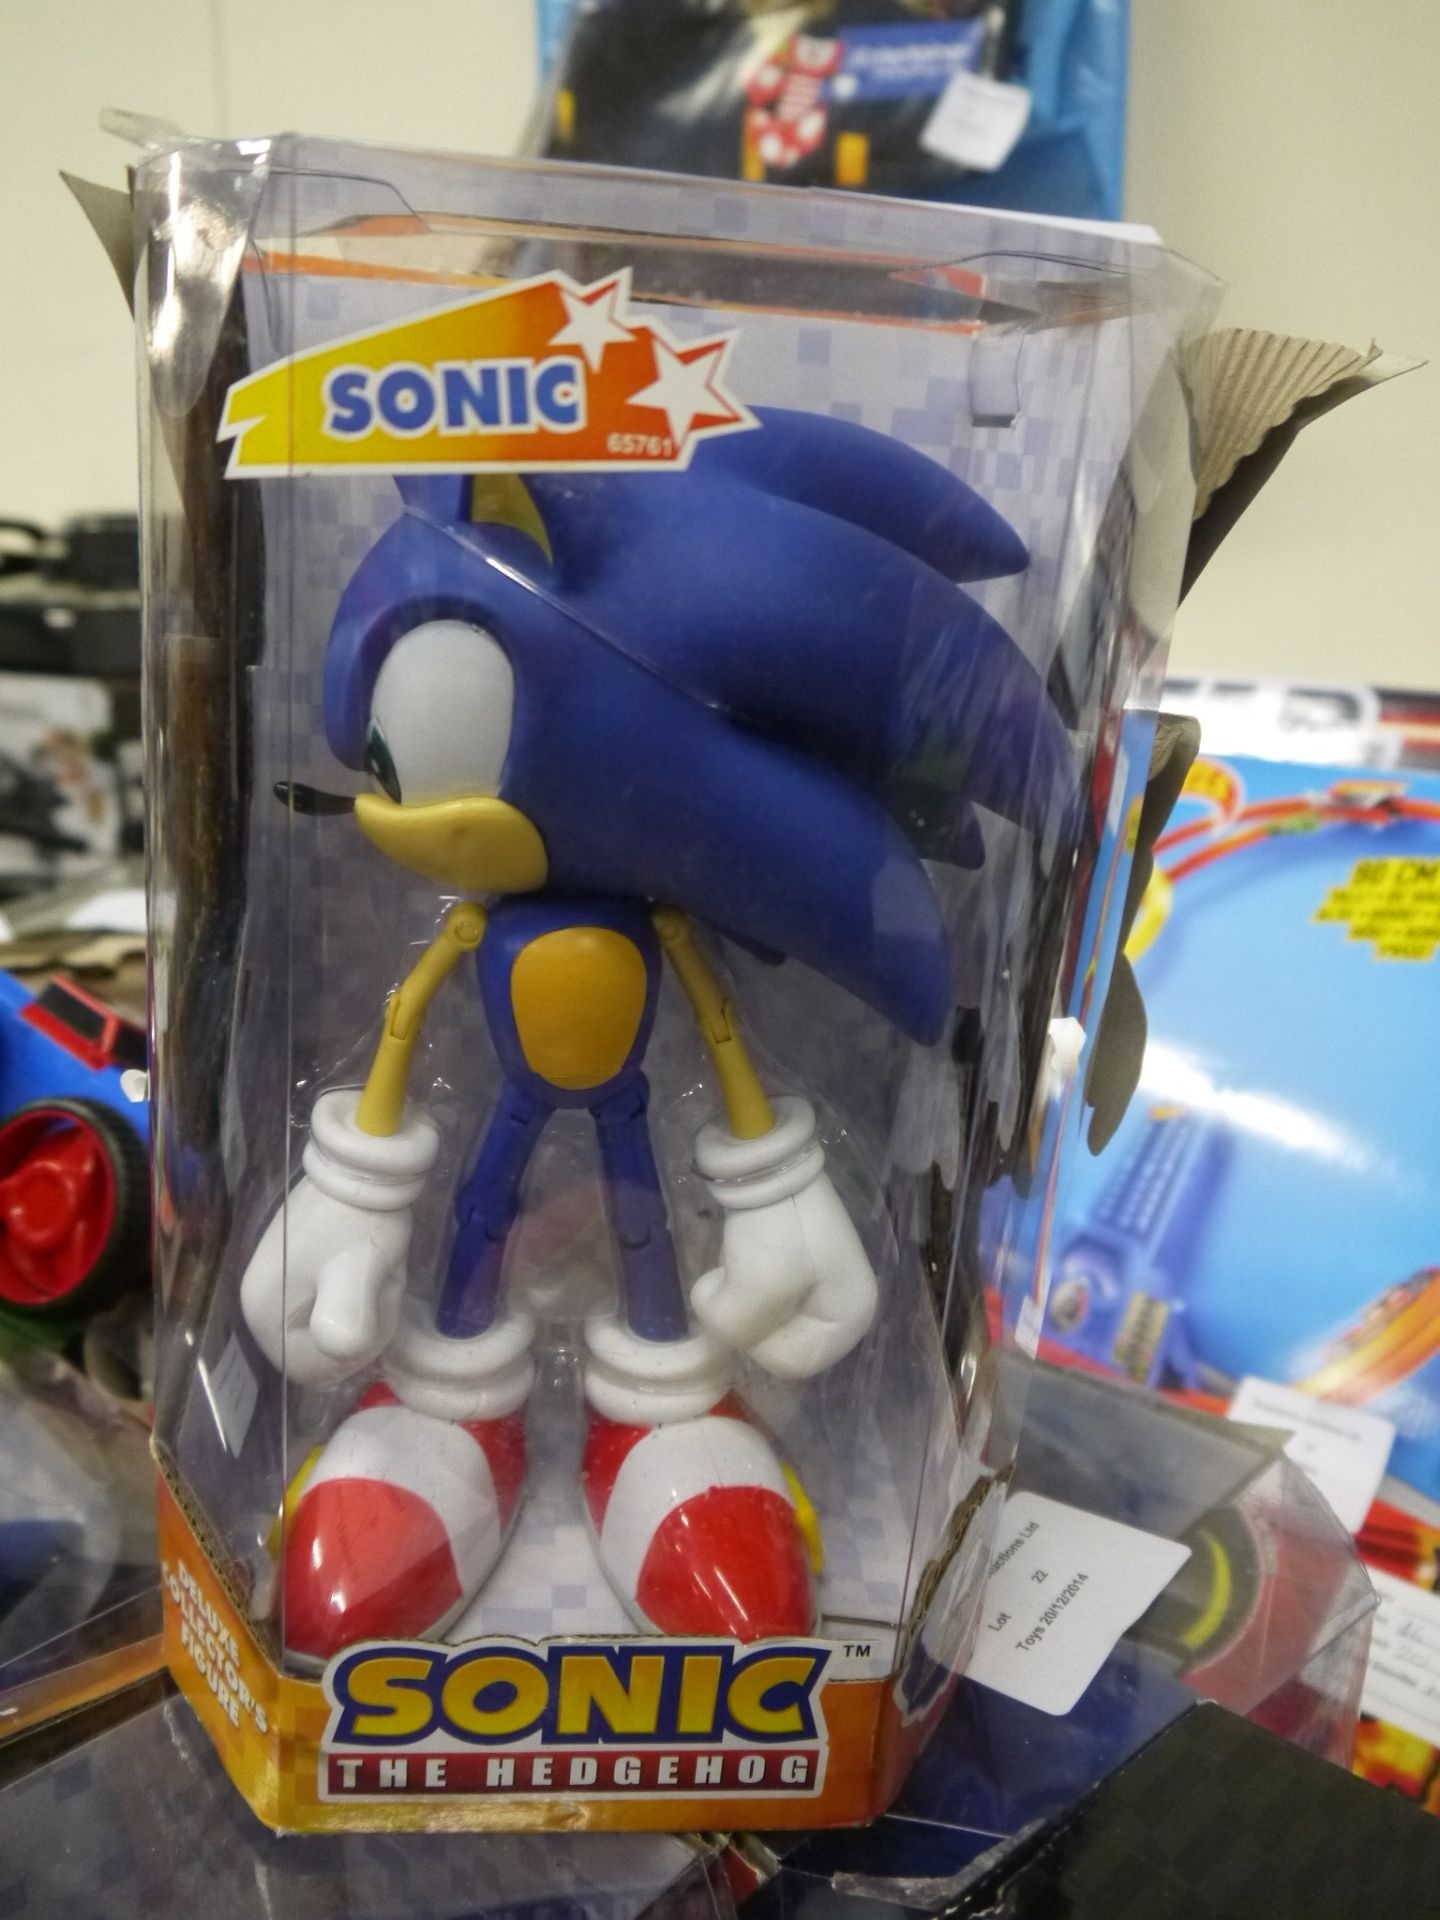 Sonic The Hedgehog Deluxe Collectors Figure. Looks new, slightly damaged packaging.